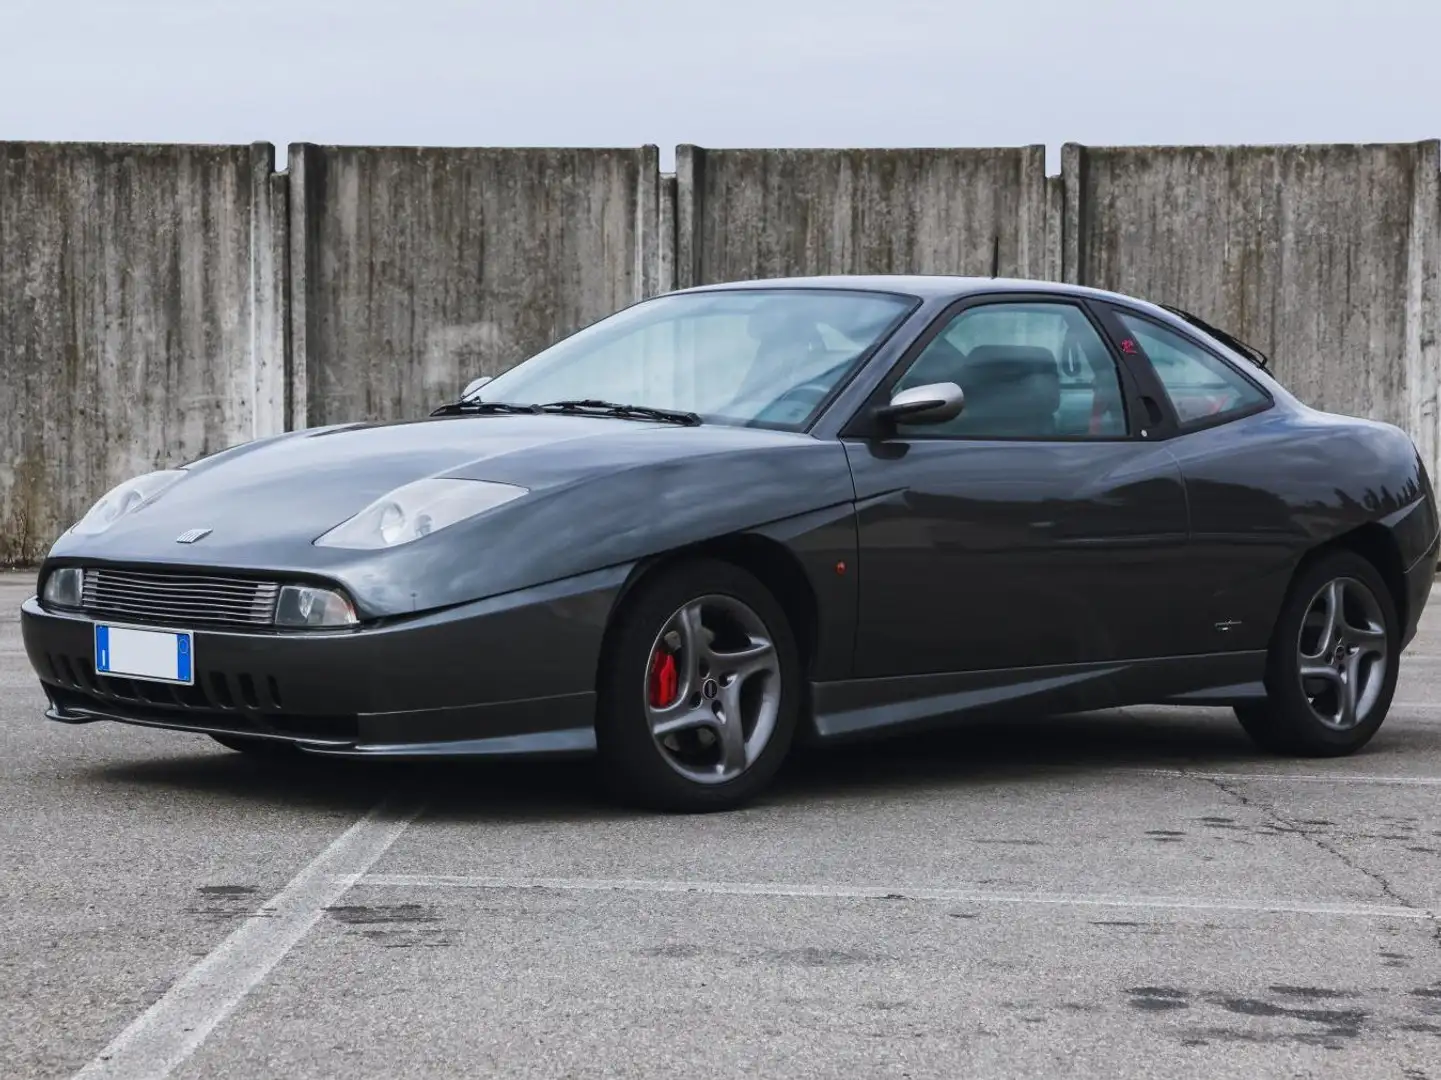 Fiat Coupe Coupe 2.0 20v turbo Limited Edition Grau - 1